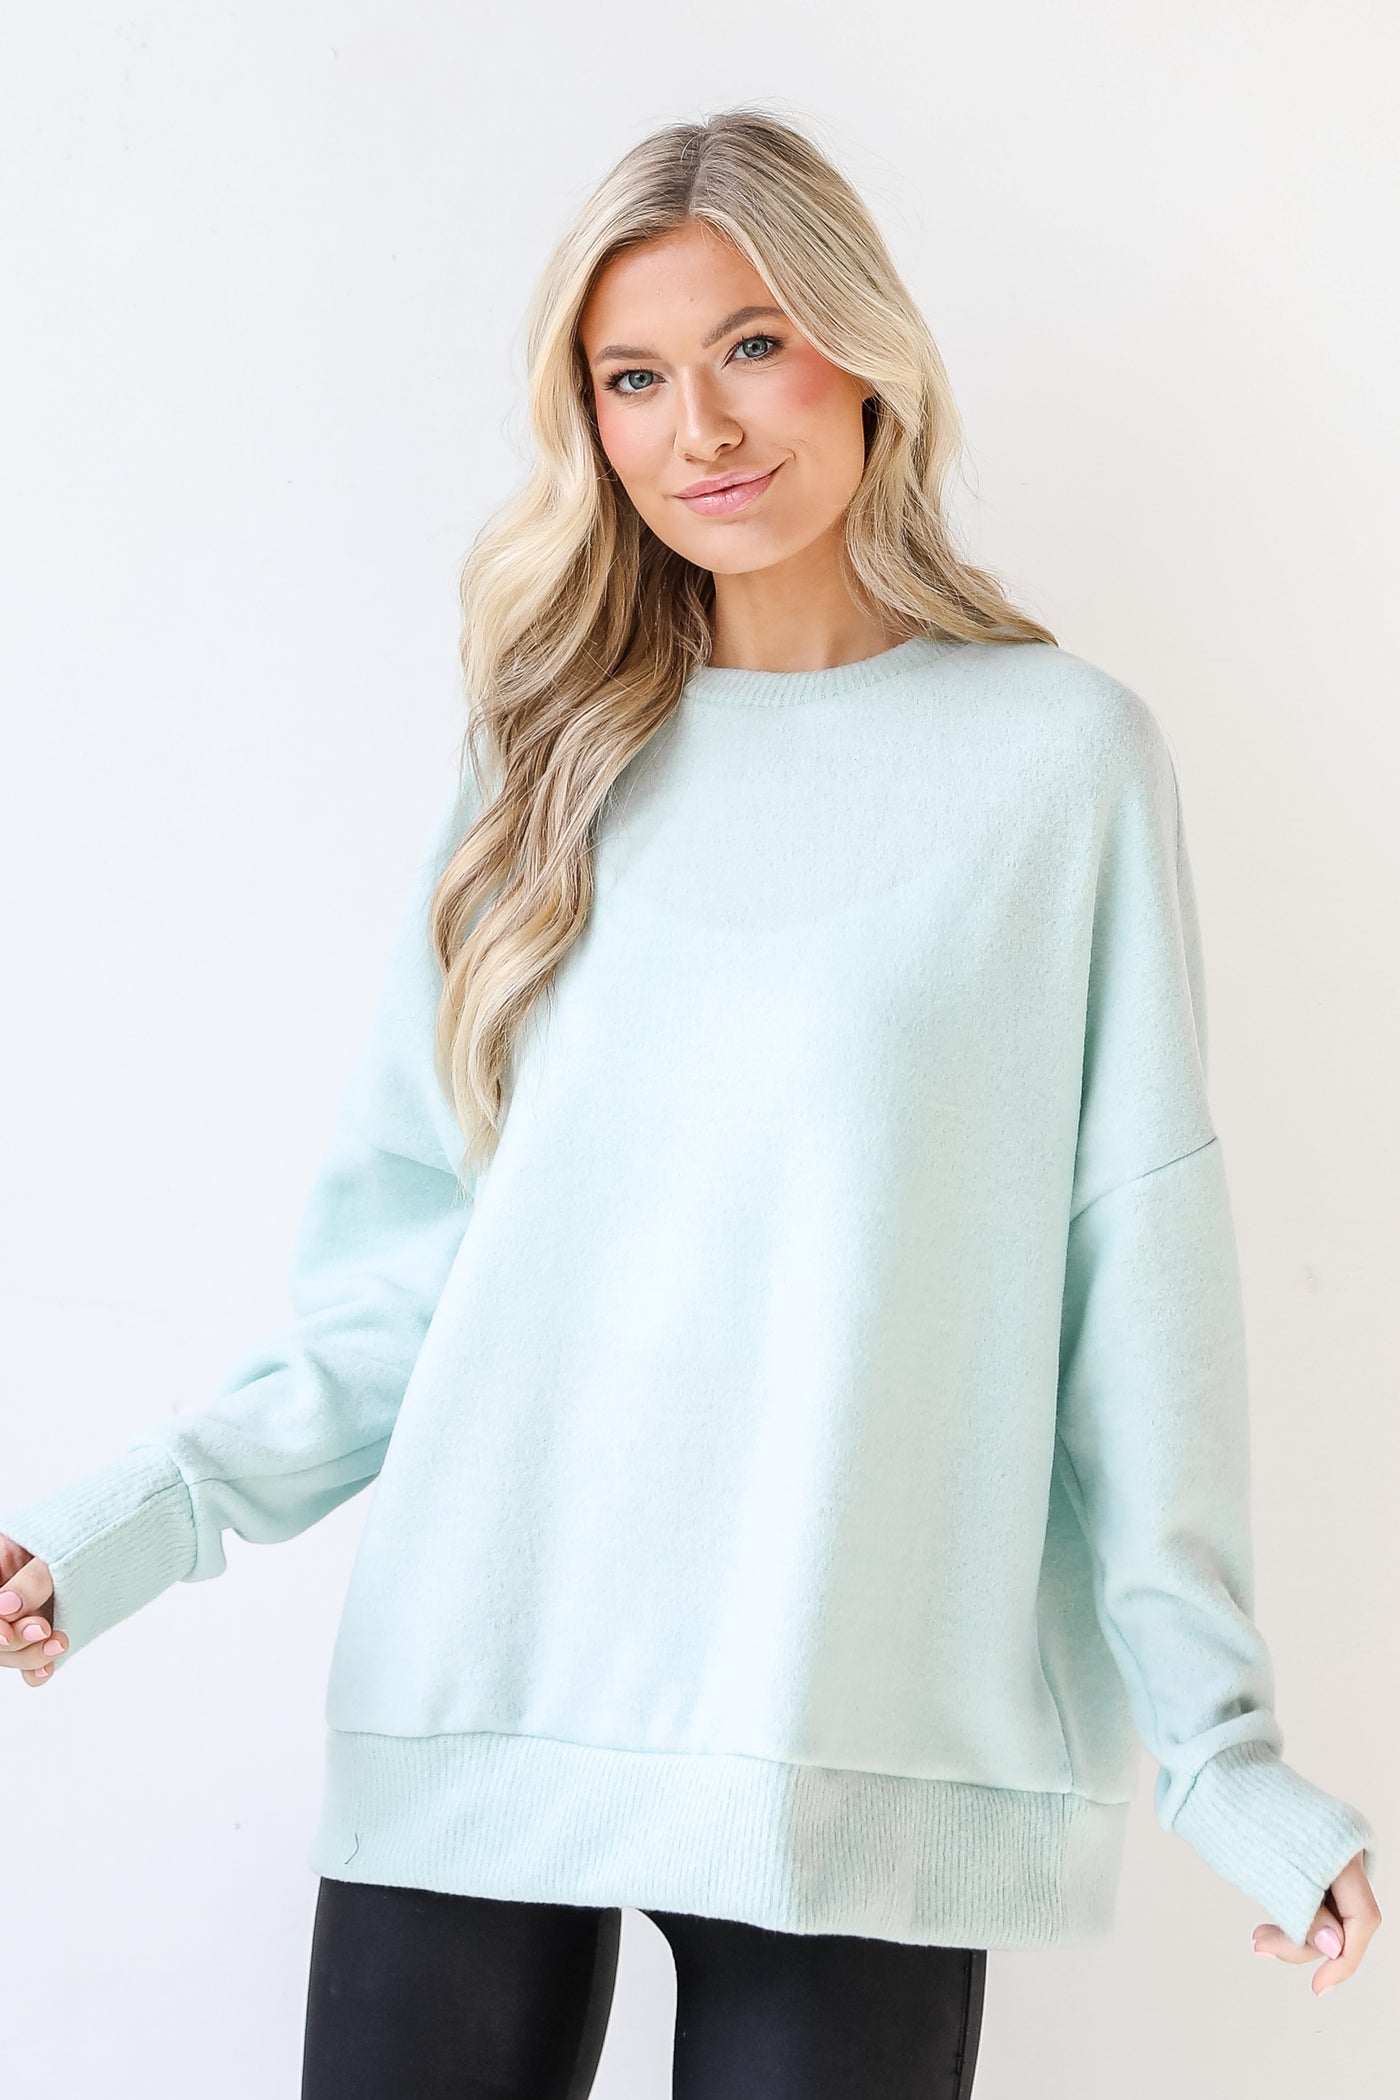 Brushed Knit Top from dress up